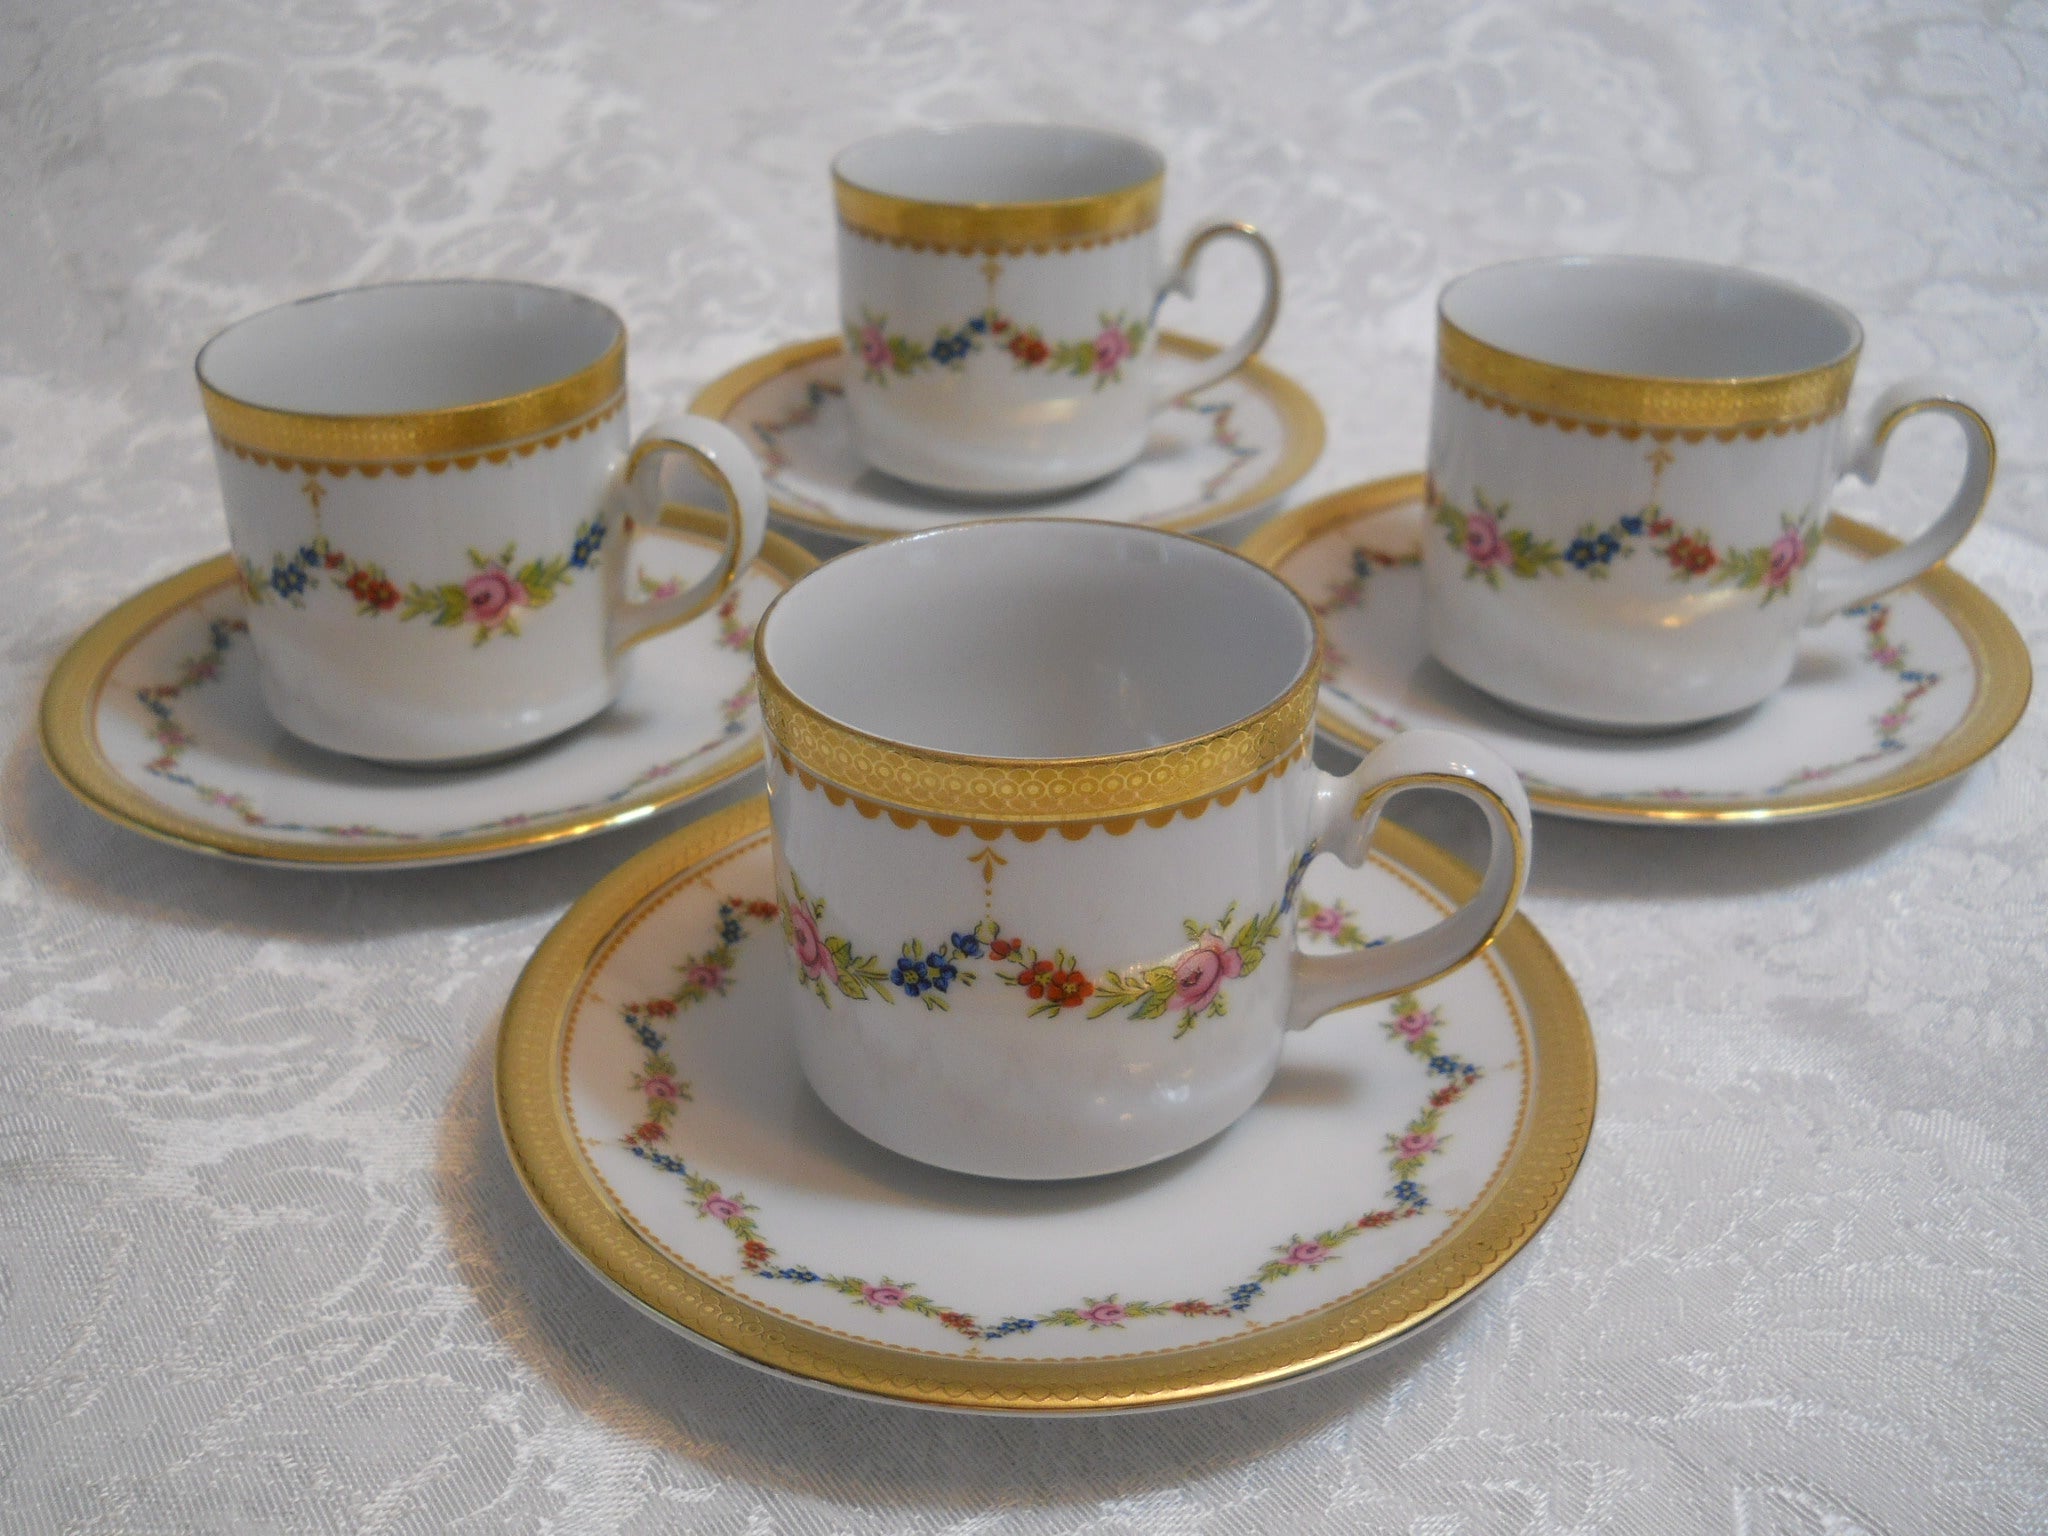 Pink Espresso Cup, Gold Rimmed Espresso Cups, Vintage Espresso Cup, Vintage Demitasse  Cup, Vintage Demitasse Cups and Saucers 